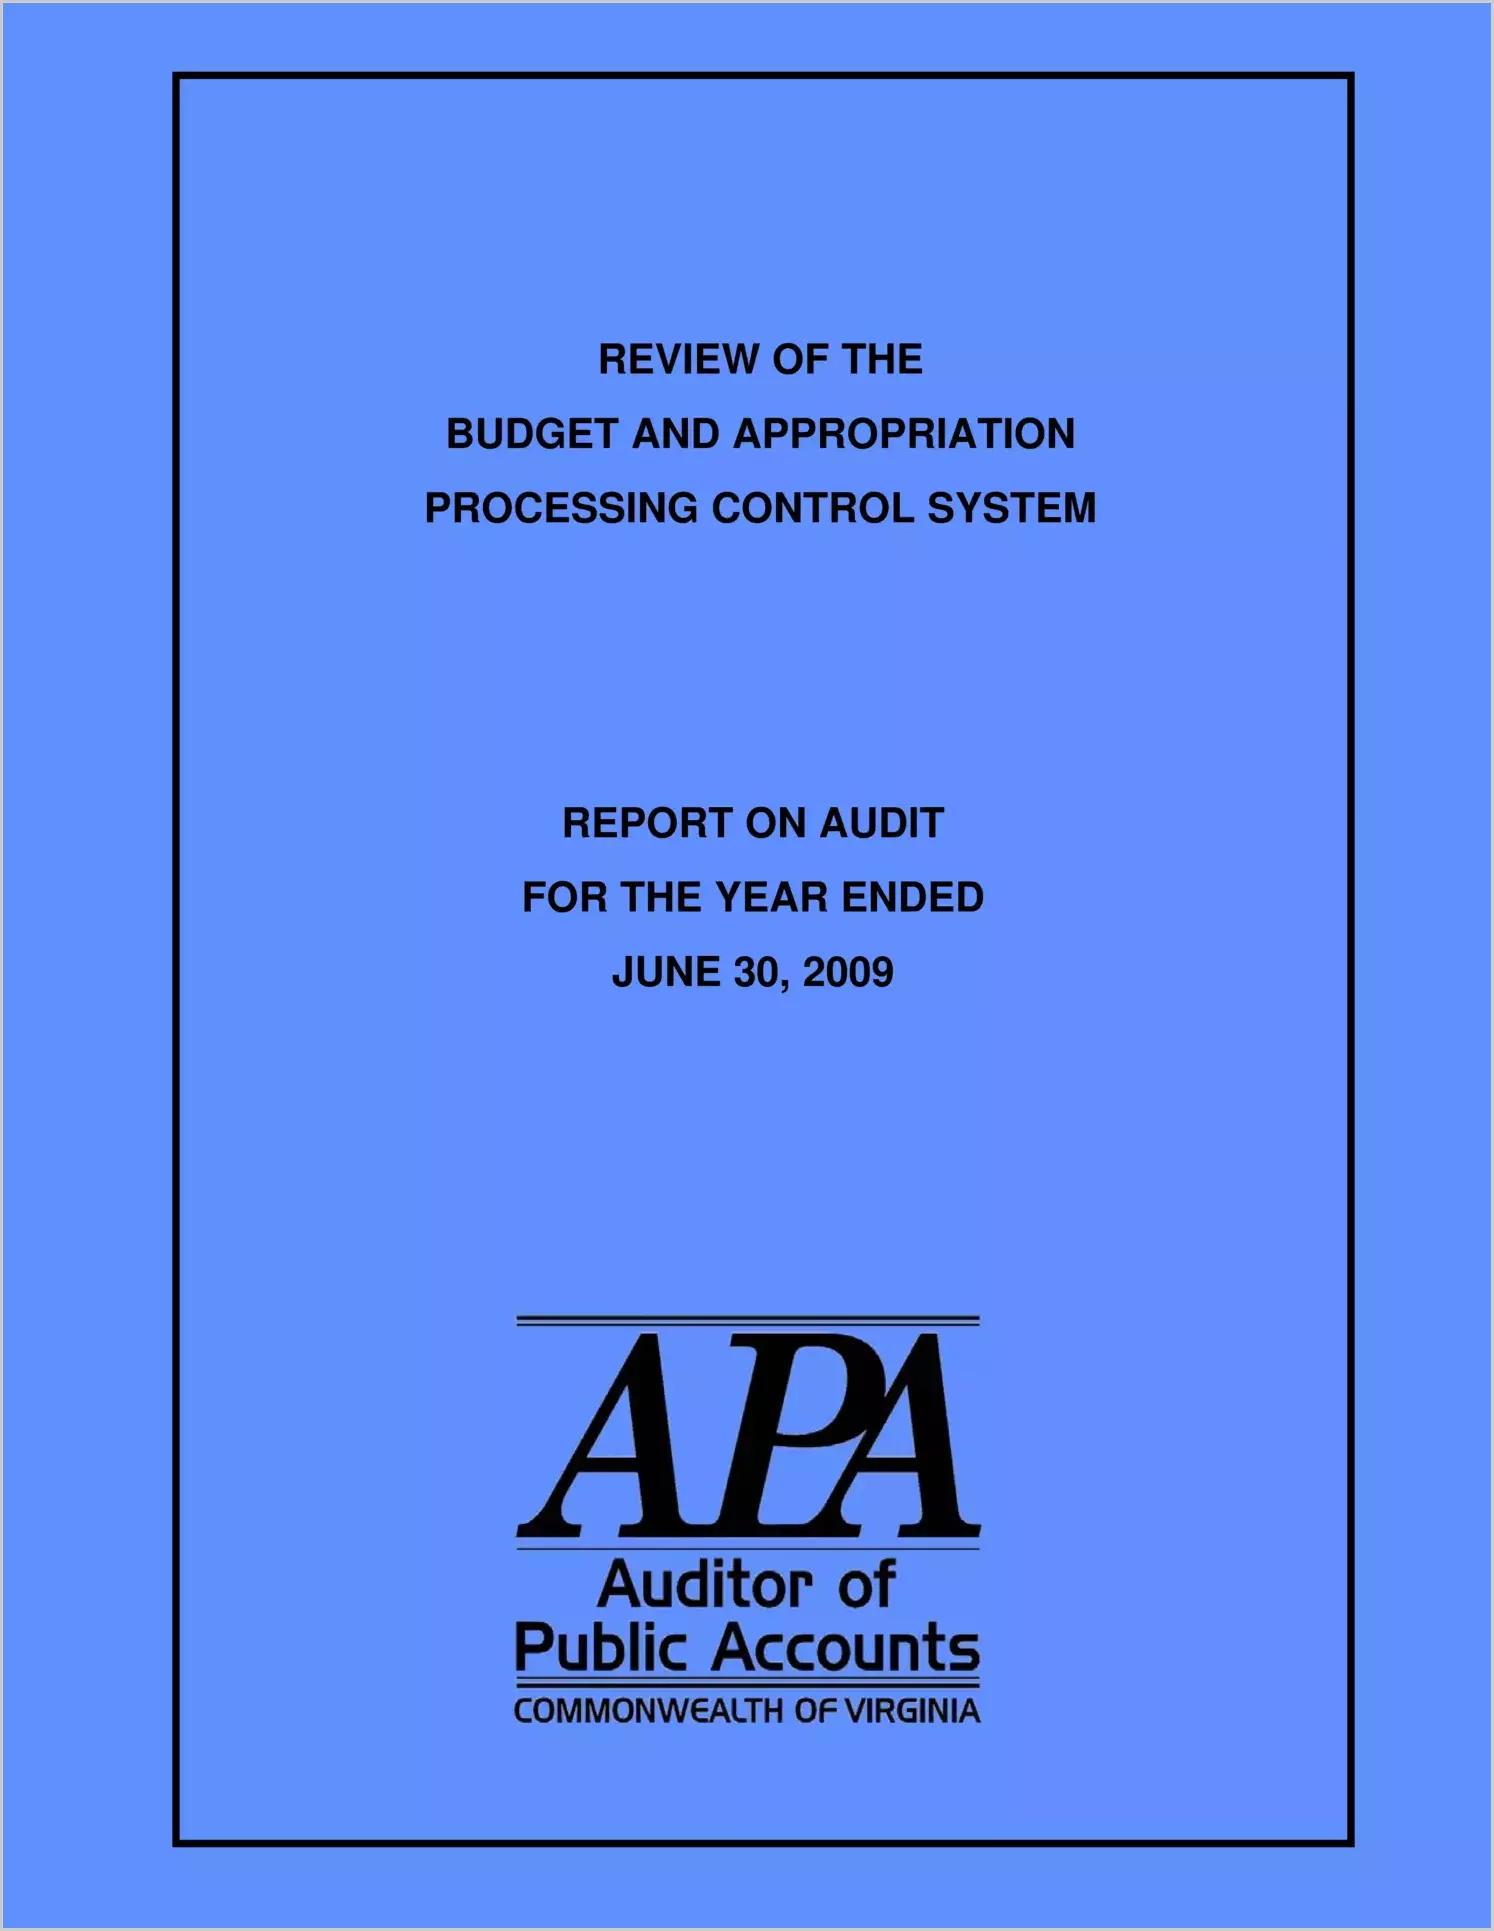 Review of the Budget and Appropriation Processing Control System for the year ended June 30, 2009